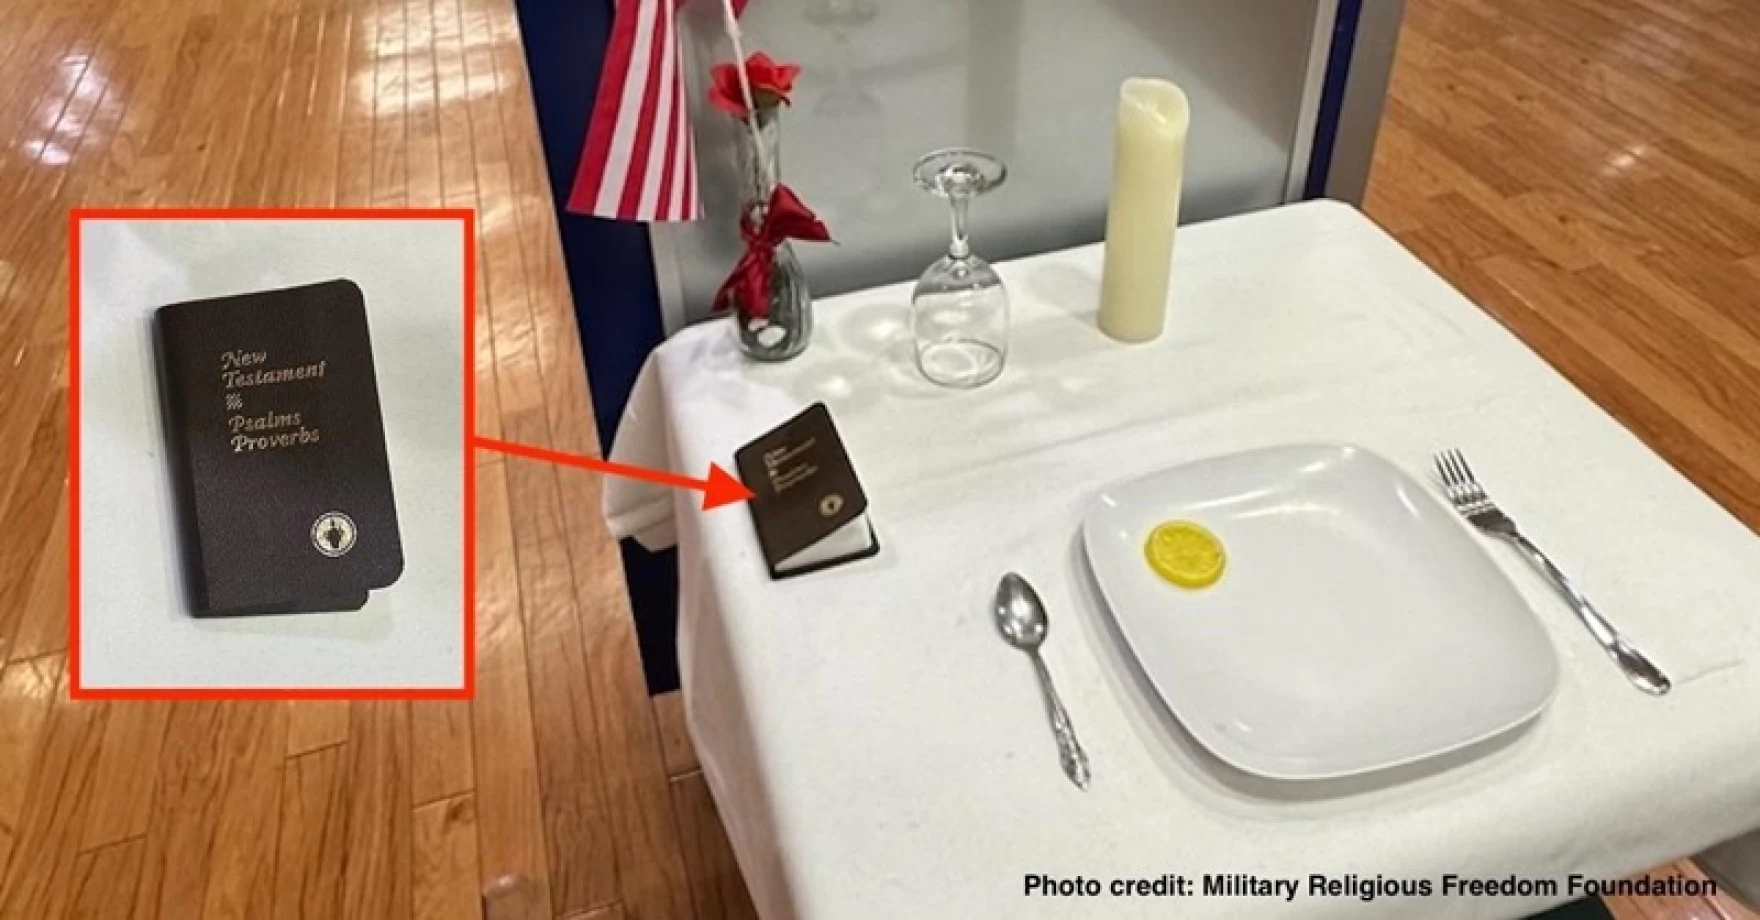 Kentucky Council of Churches chief not upset over removal of Bible from VA POW/MIA display